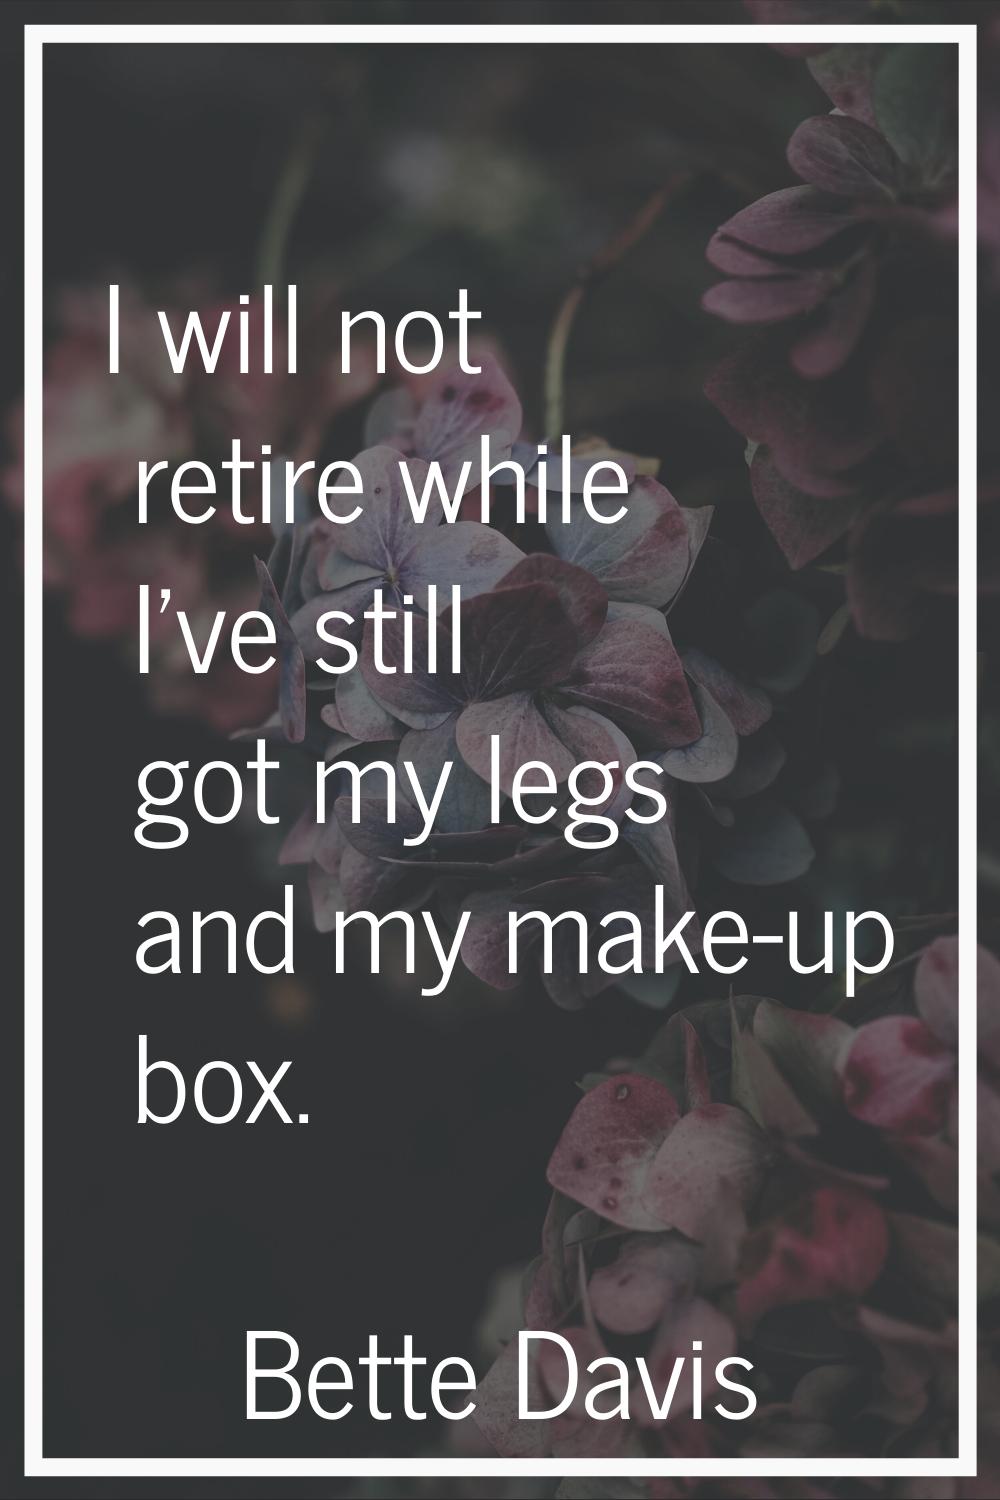 I will not retire while I've still got my legs and my make-up box.